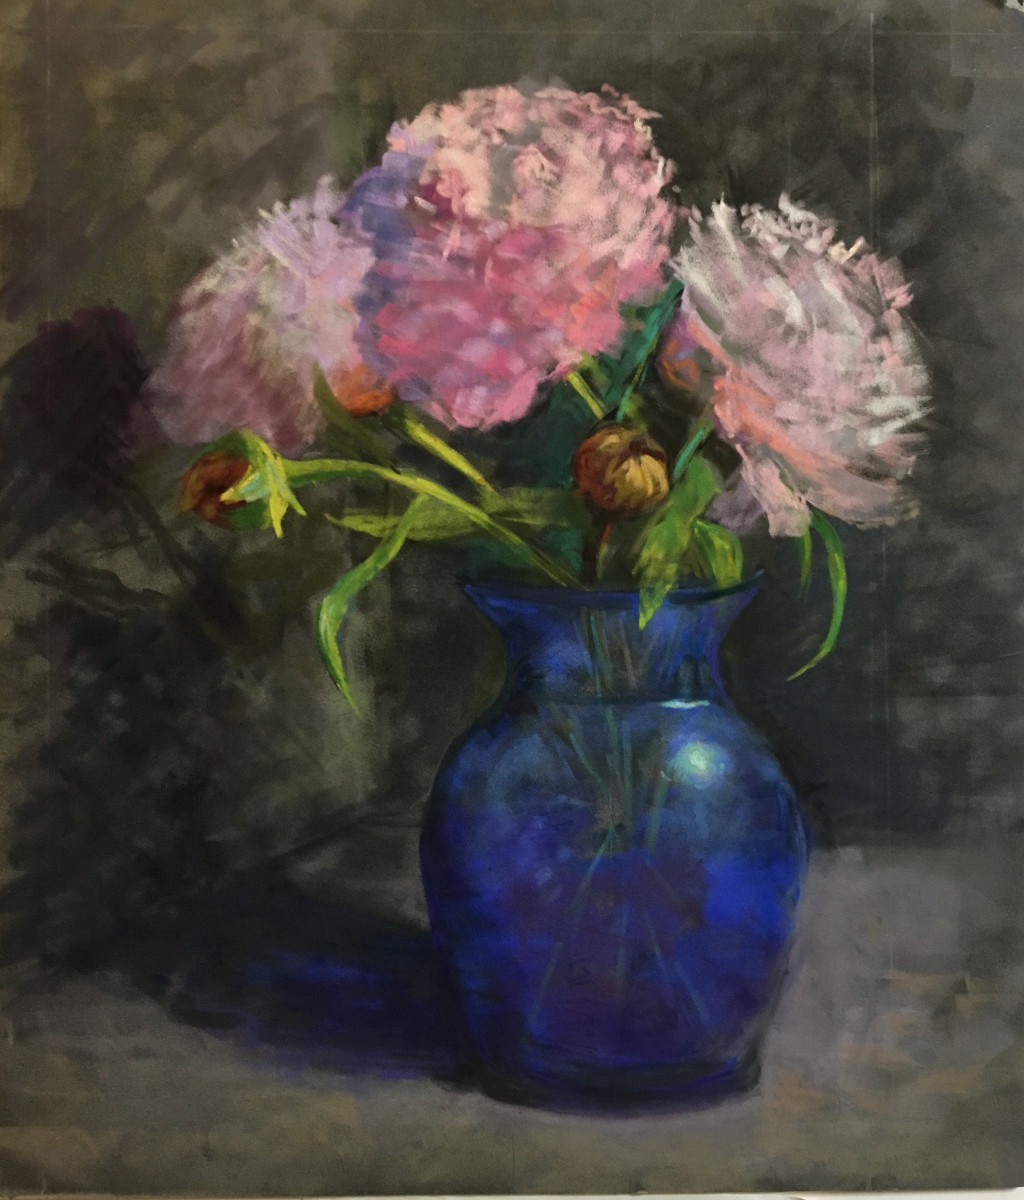 A Peony Saved by Karen Israel 